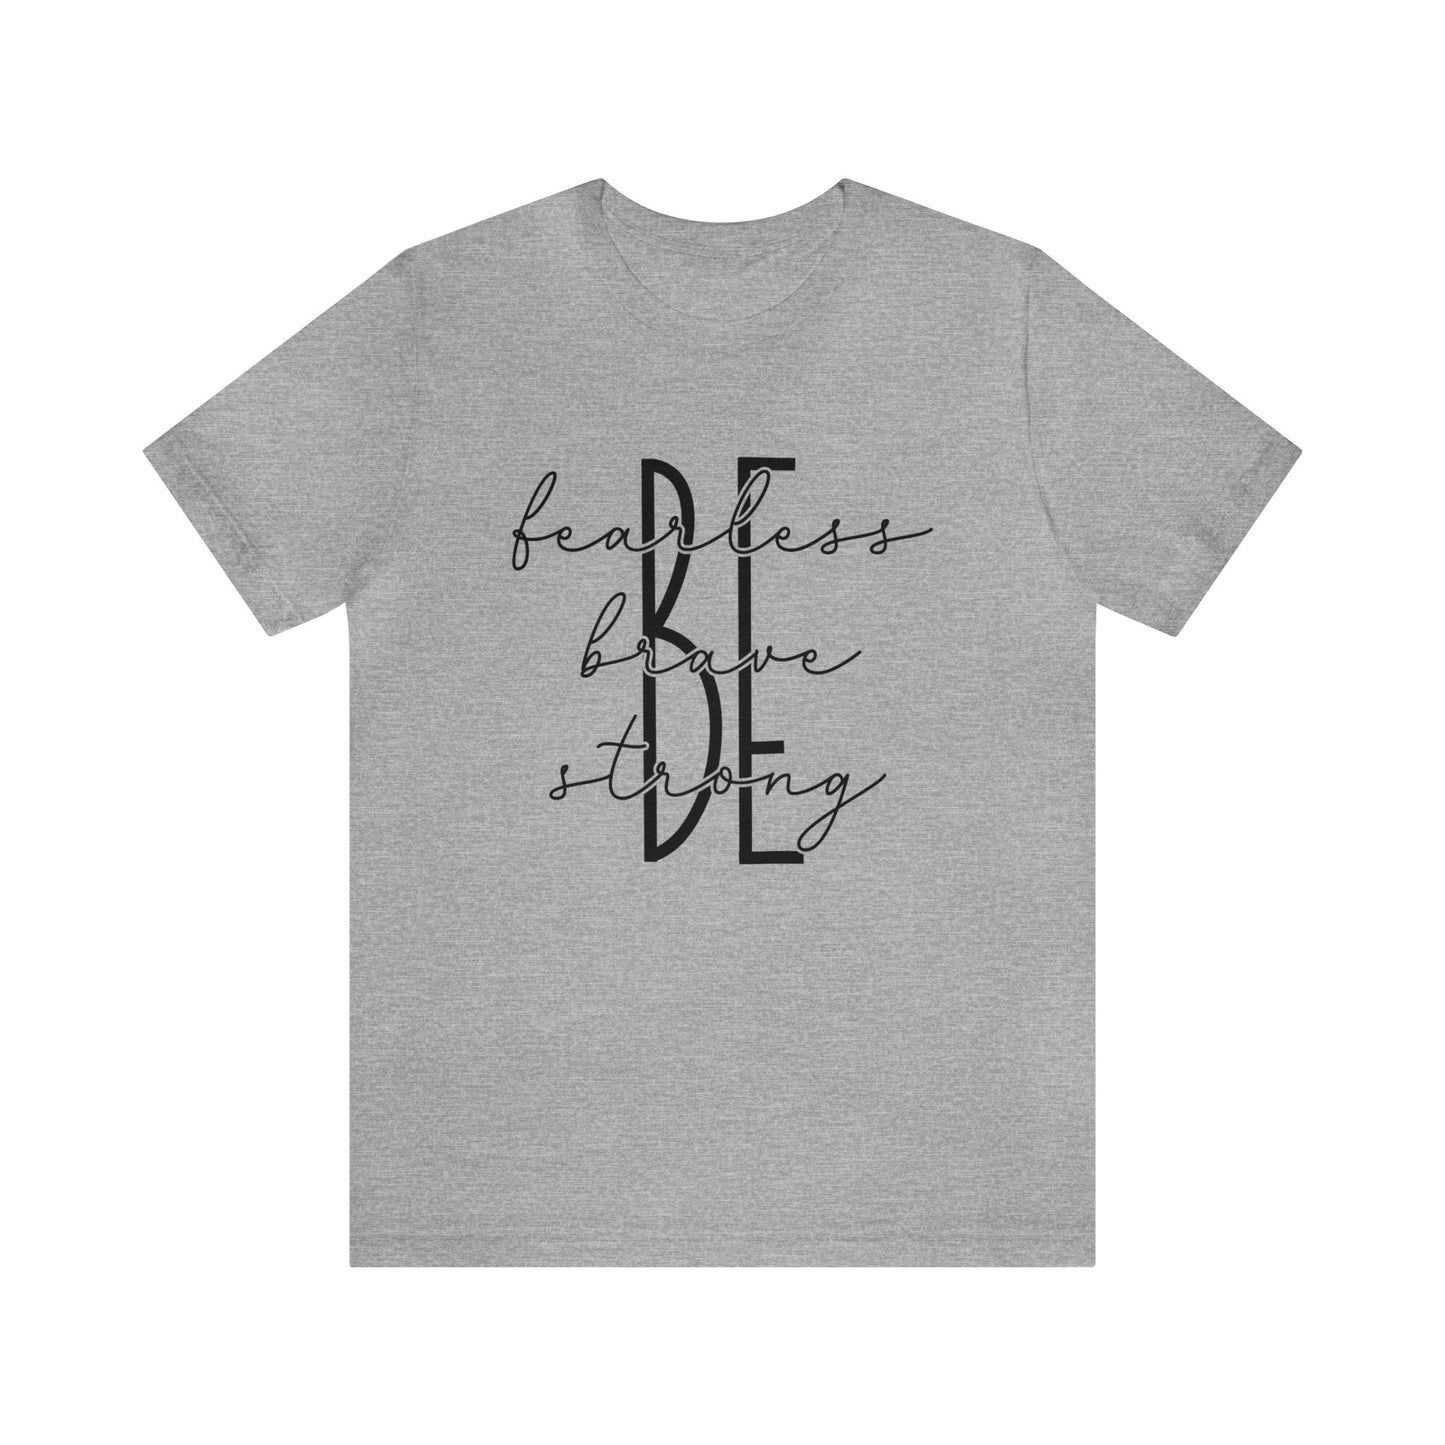 Be Fearless Brave Strong Women's Short Sleeve Tee